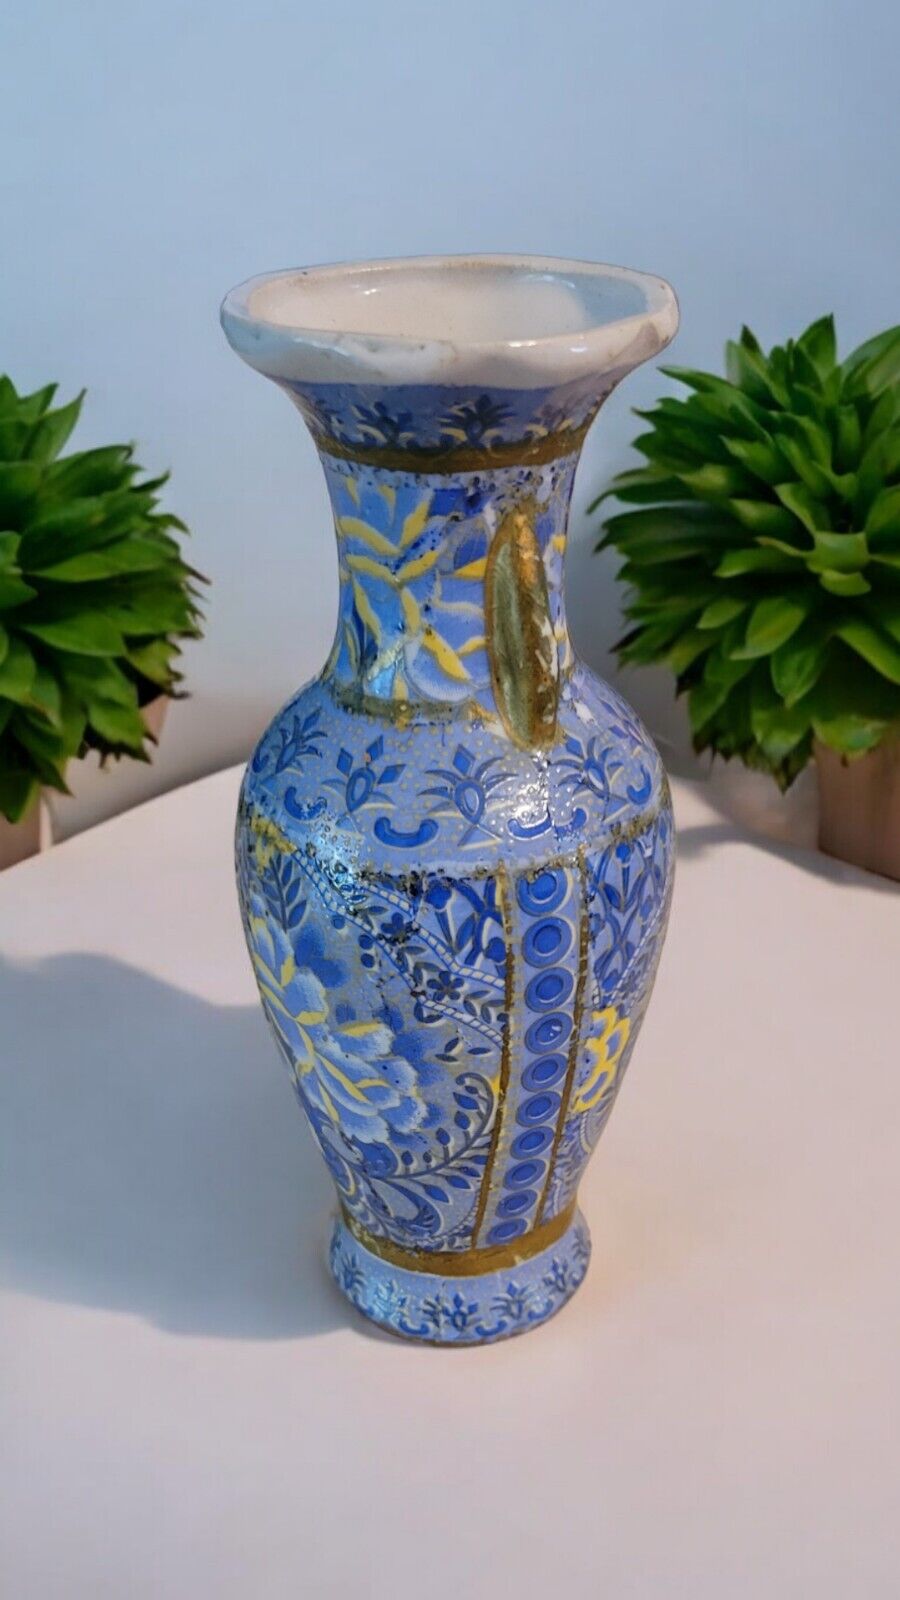 Vintage Chinese Porcelain Vase 5.5 Inches Tall Floral Flowers Blue Gold Yellow 